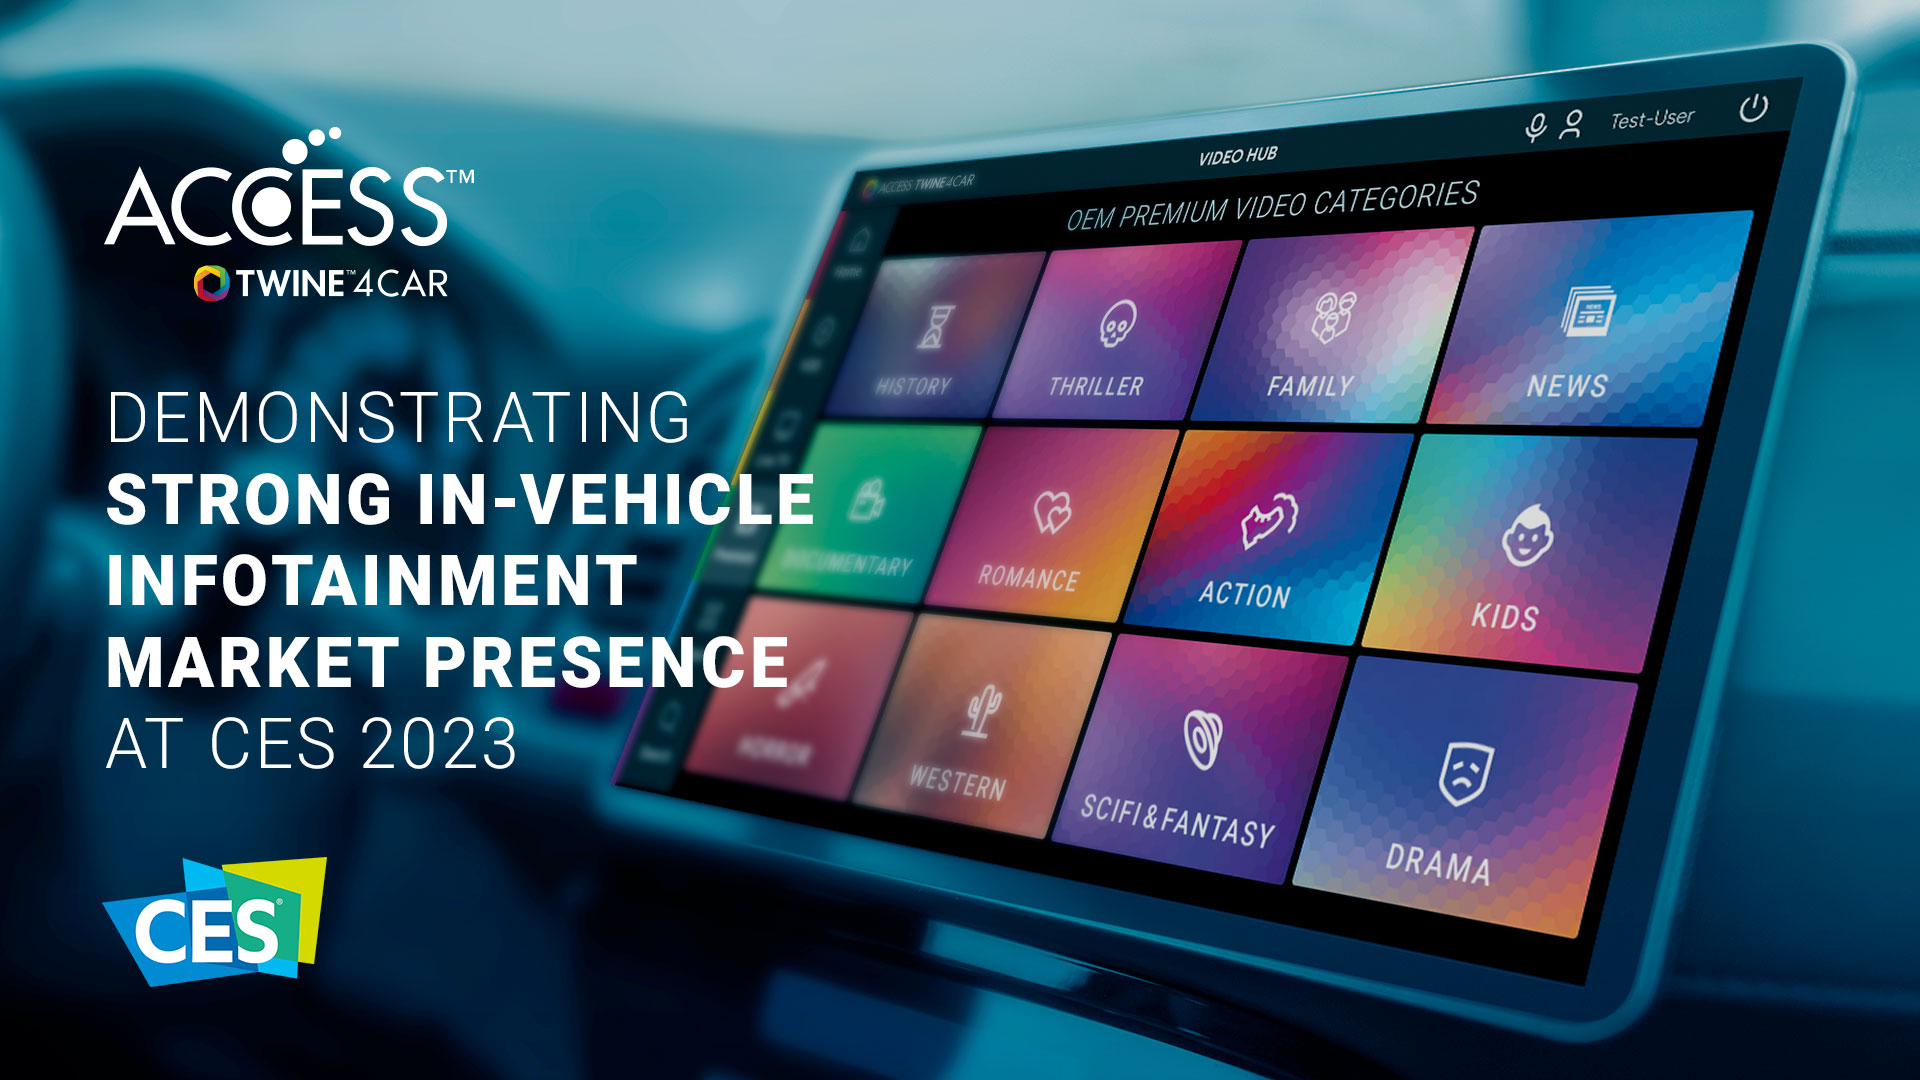 ACCESS Demonstrates Strong In-Vehicle Infotainment Market Presence at CES 2023